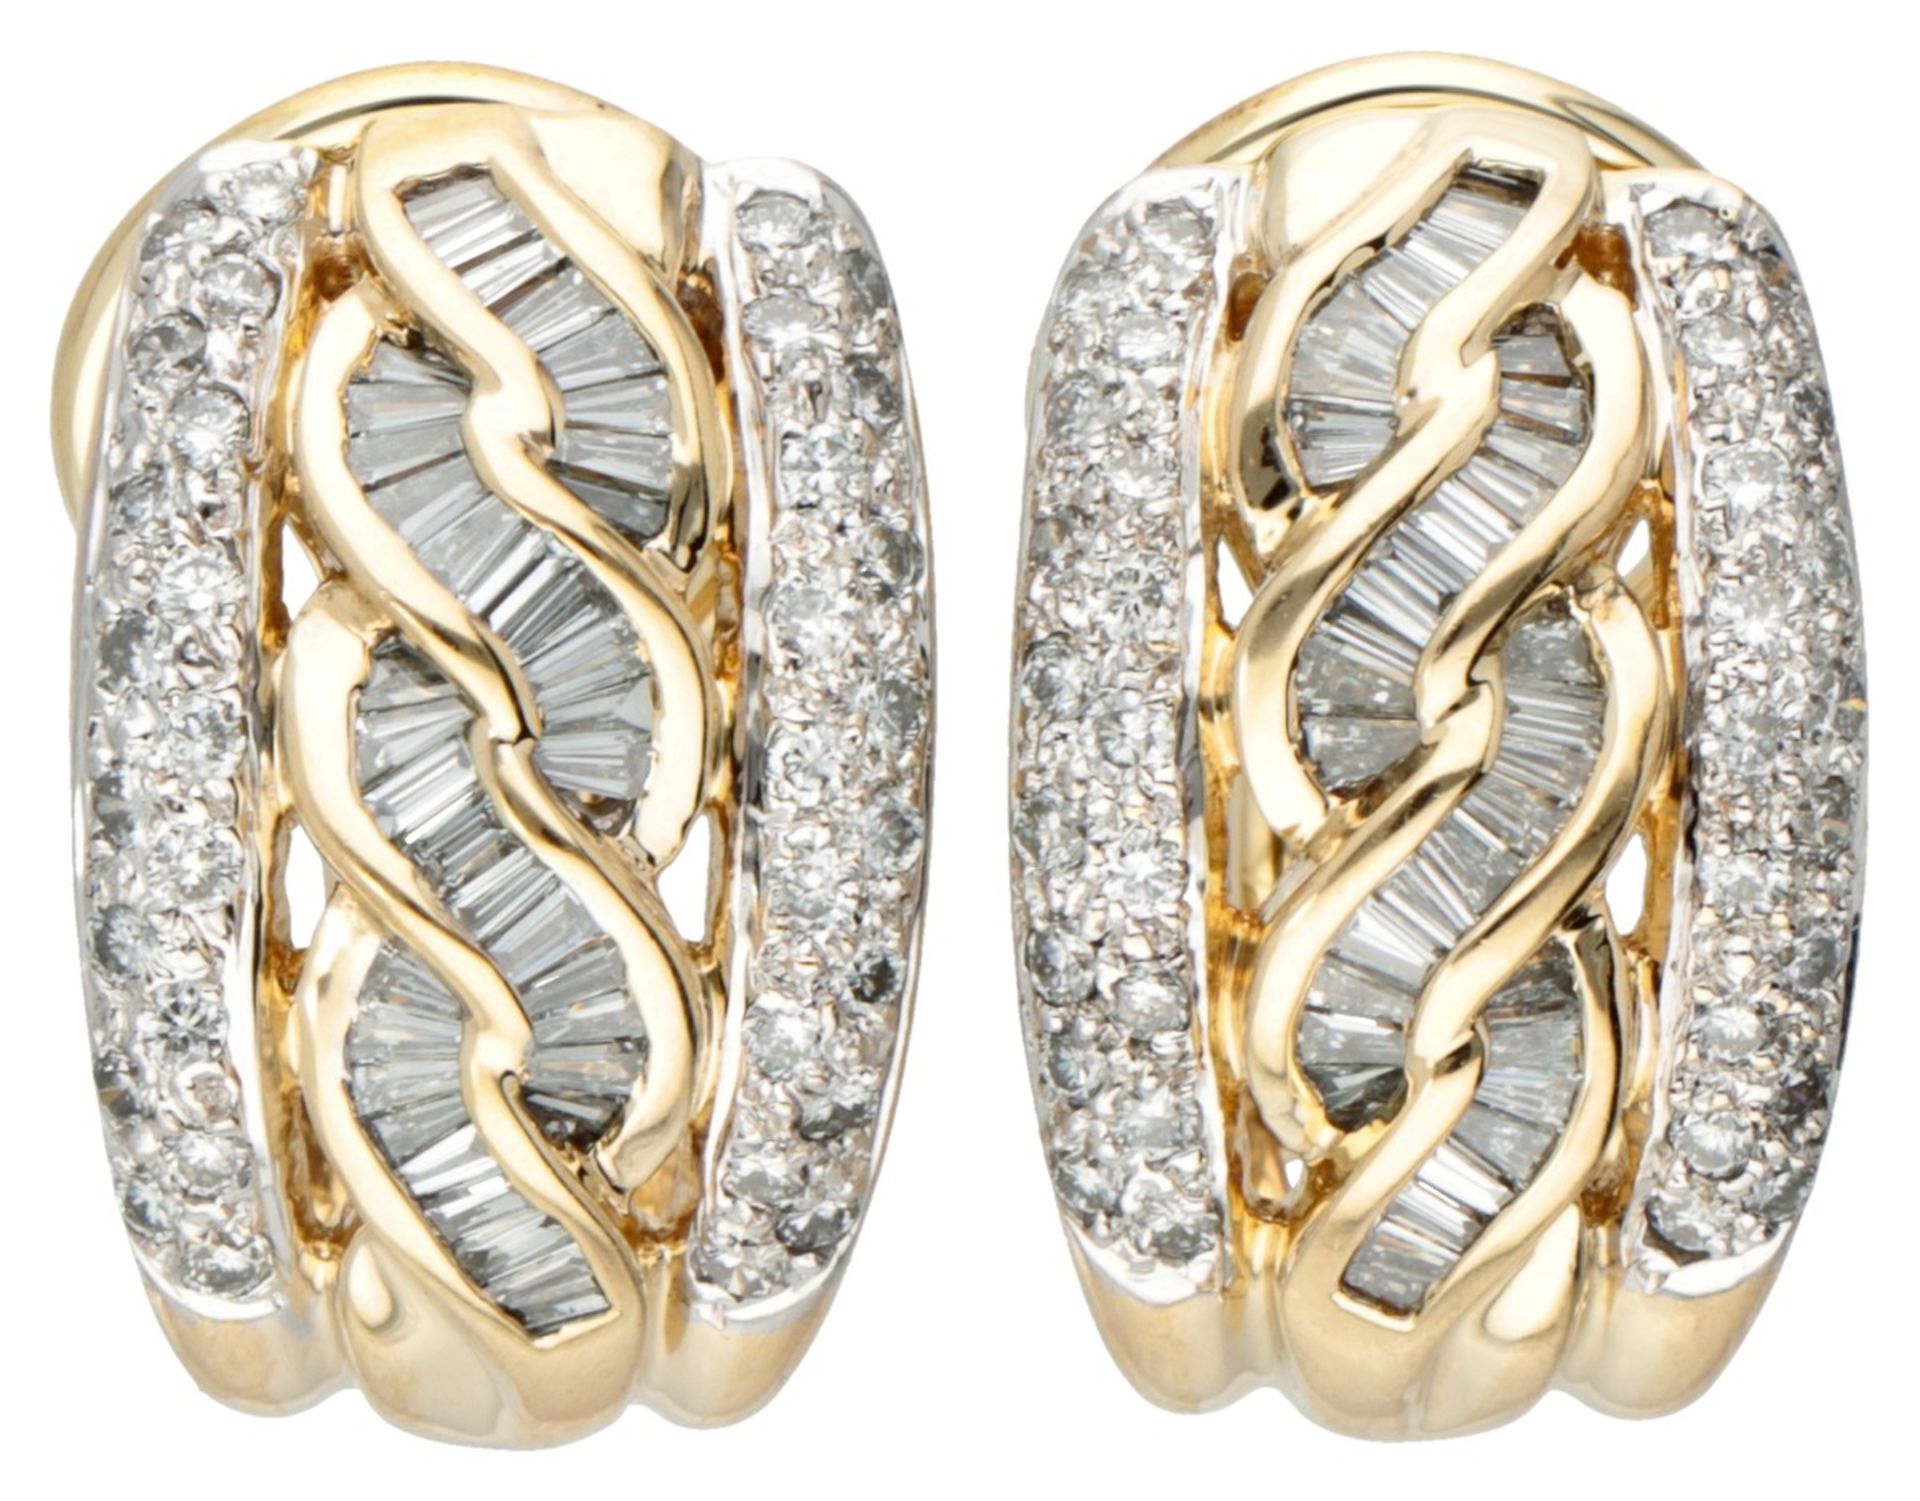 14K. Bicolor gold earrings set with approx. 0.70 ct. diamond.